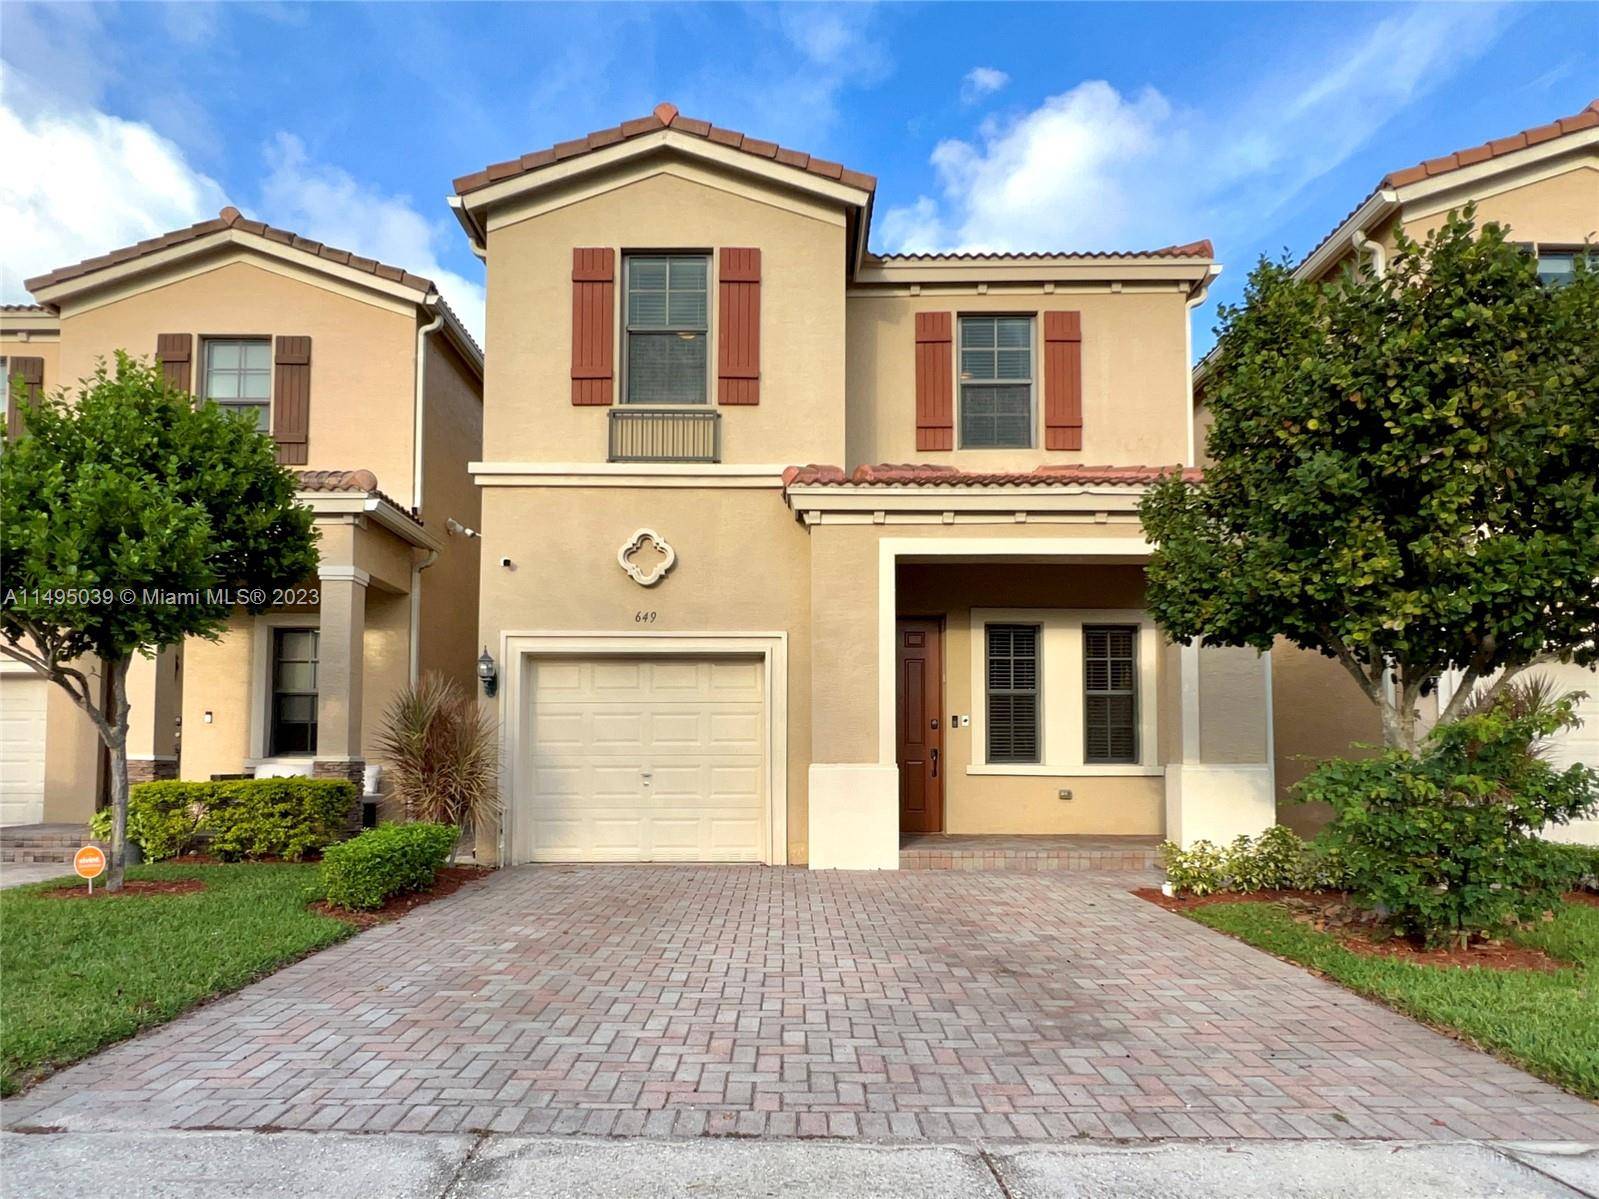 Beautiful 2 story single family home in the gated family oriented neighborhood of Aventura Isles.